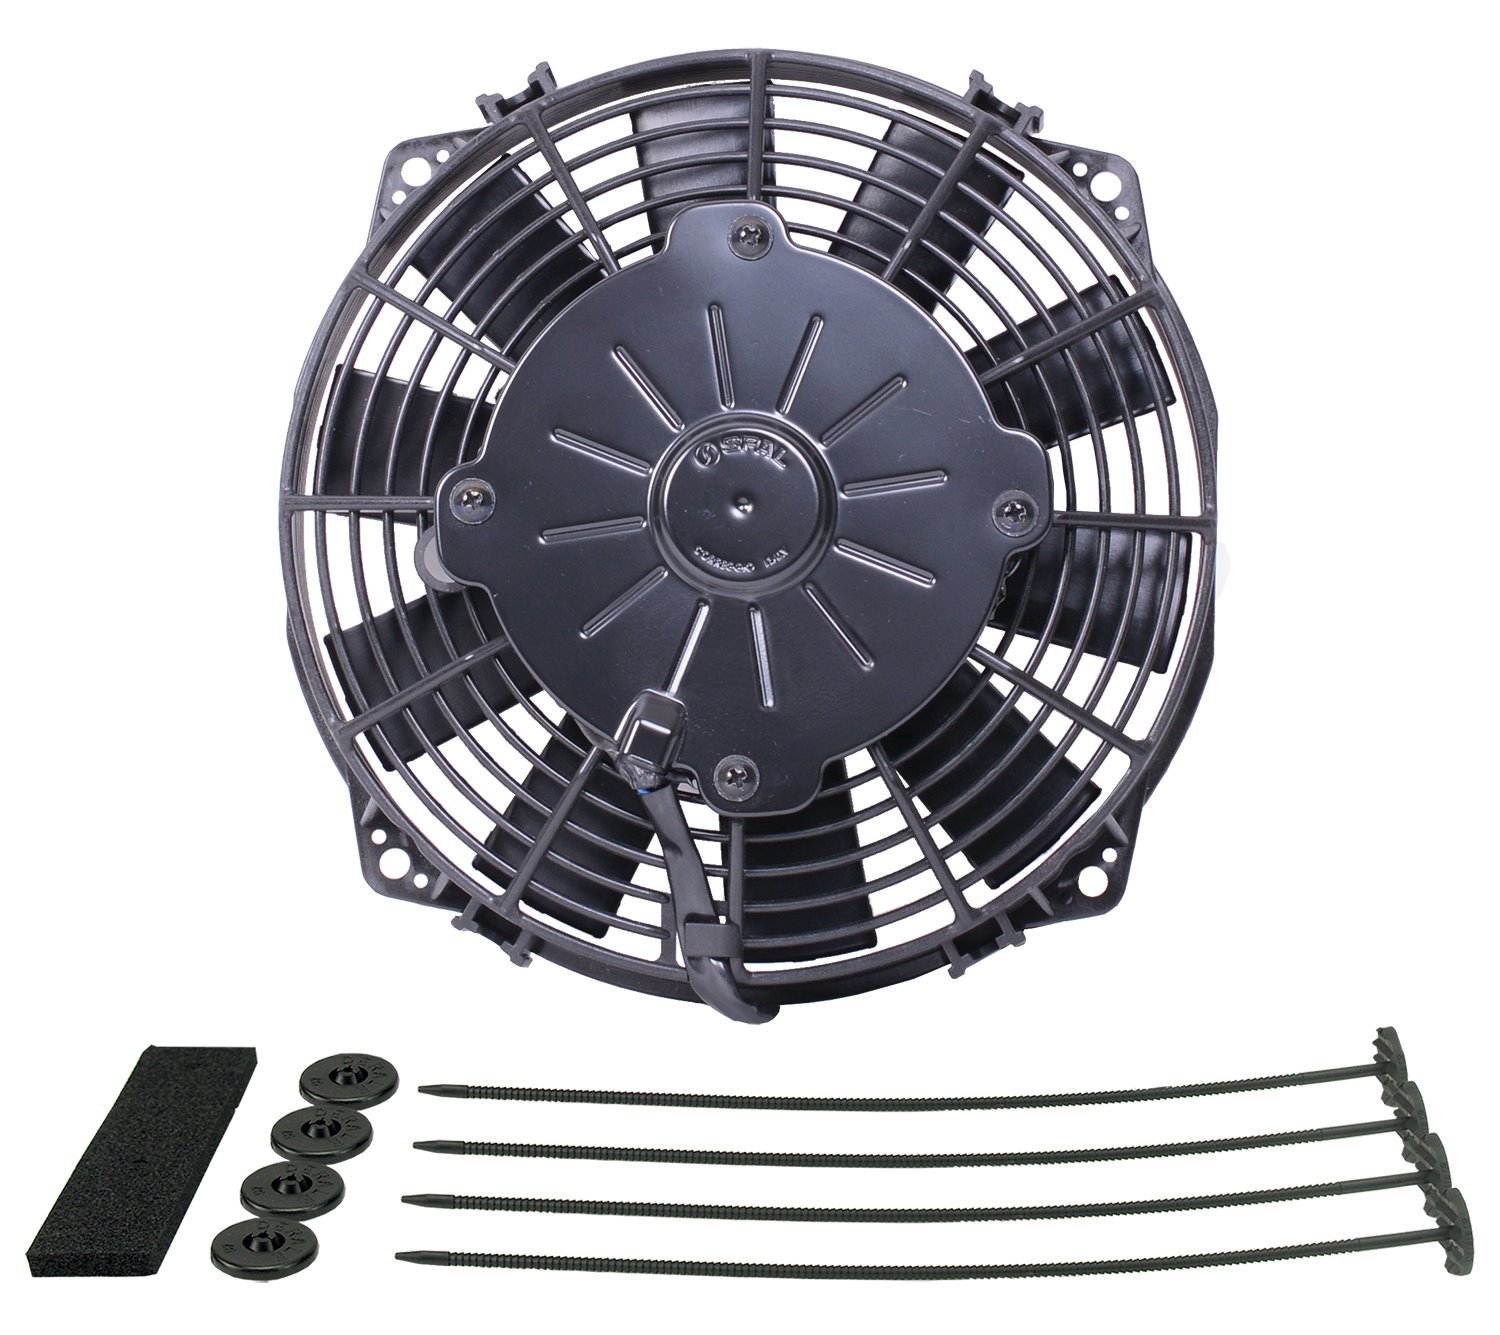 High-Output Extreme Fan